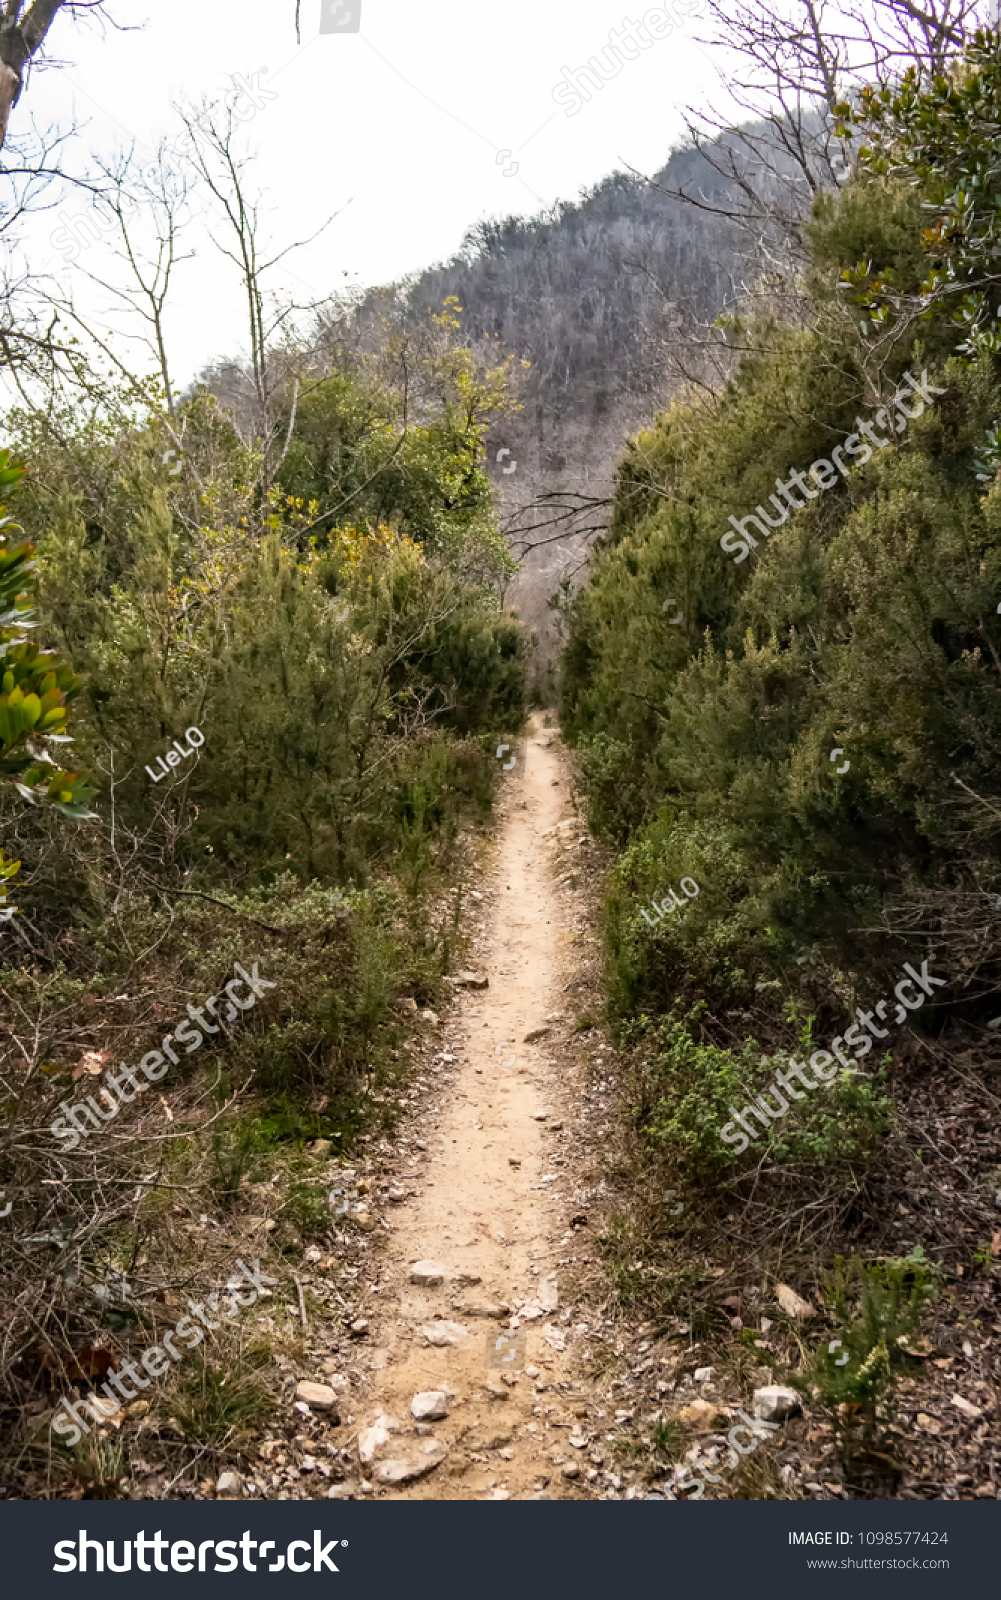 Wild path in the nature #1098577424